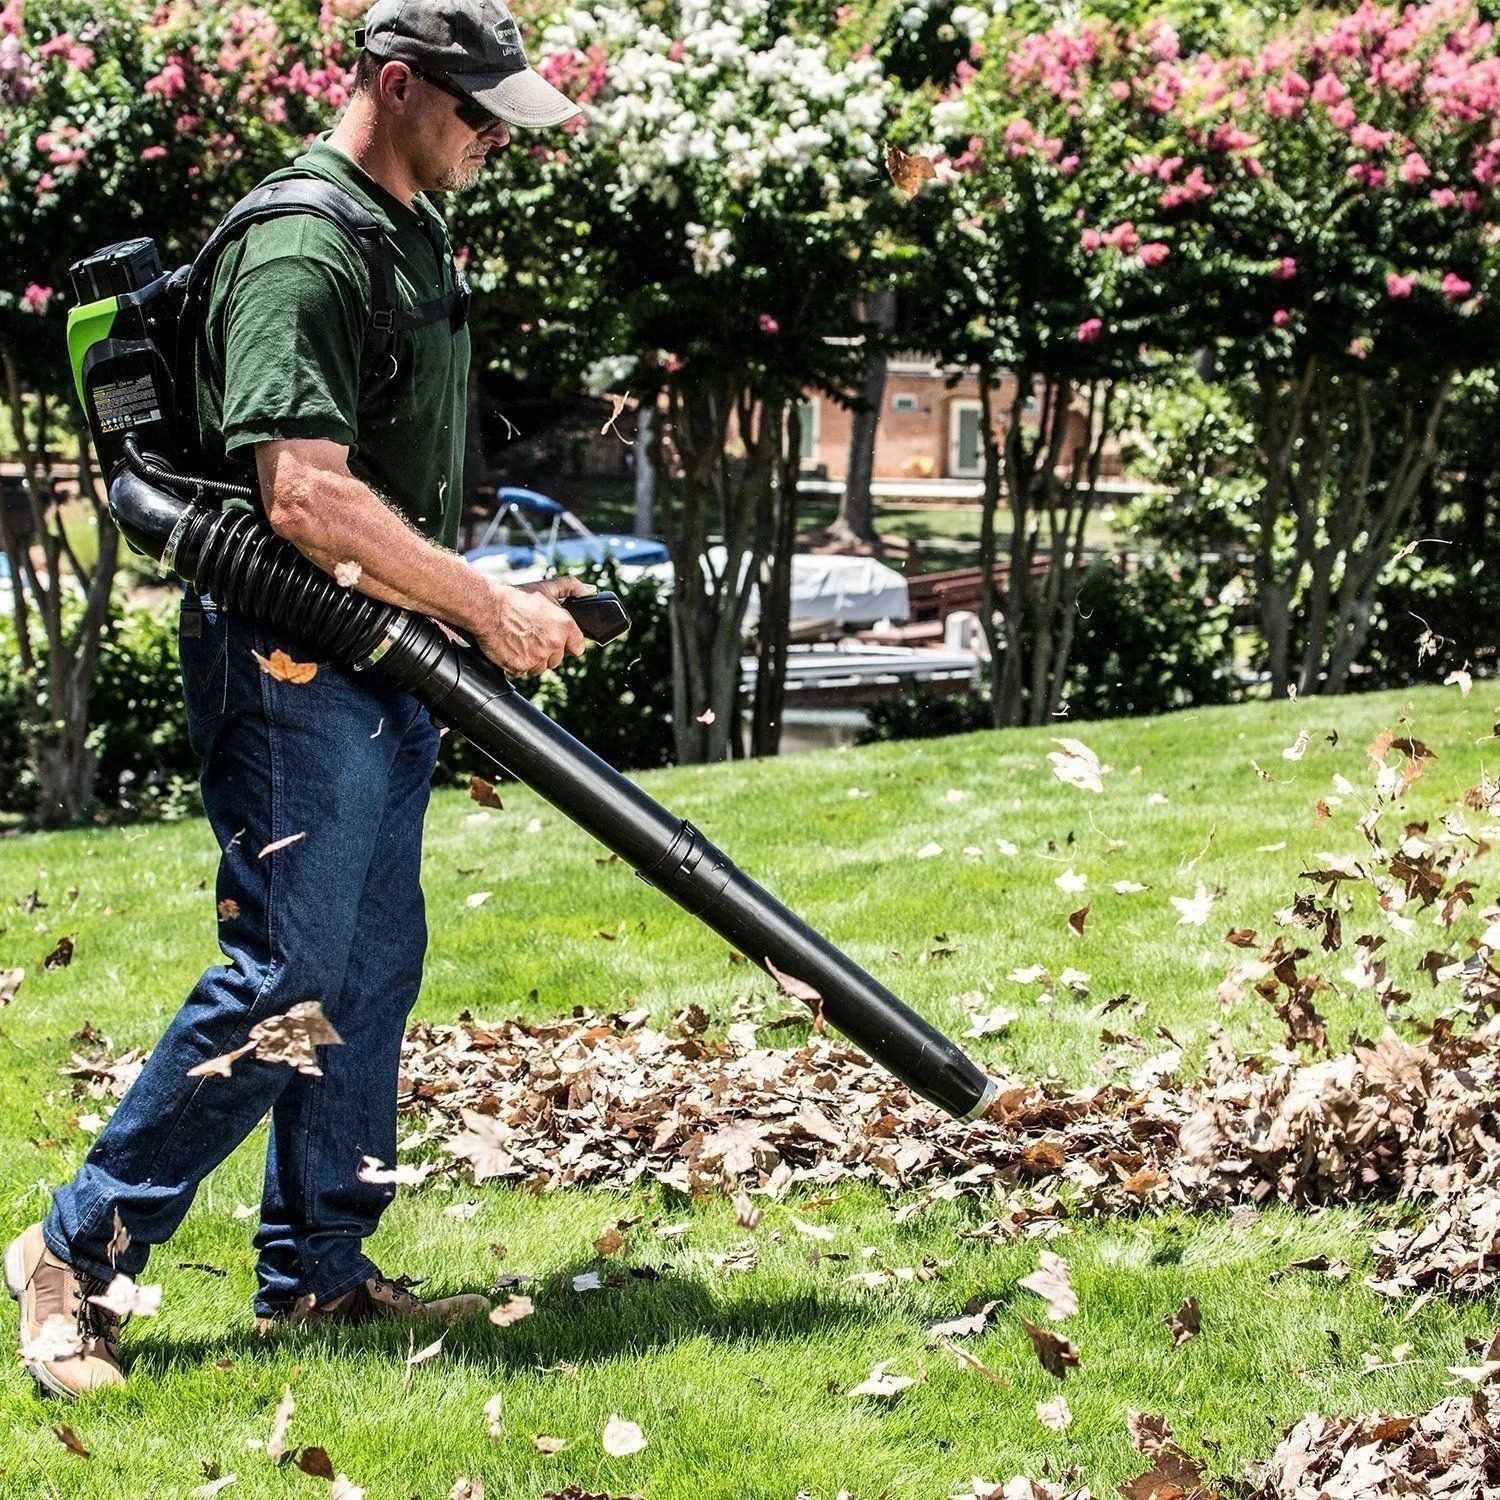 What to Look for In a Leaf Blower